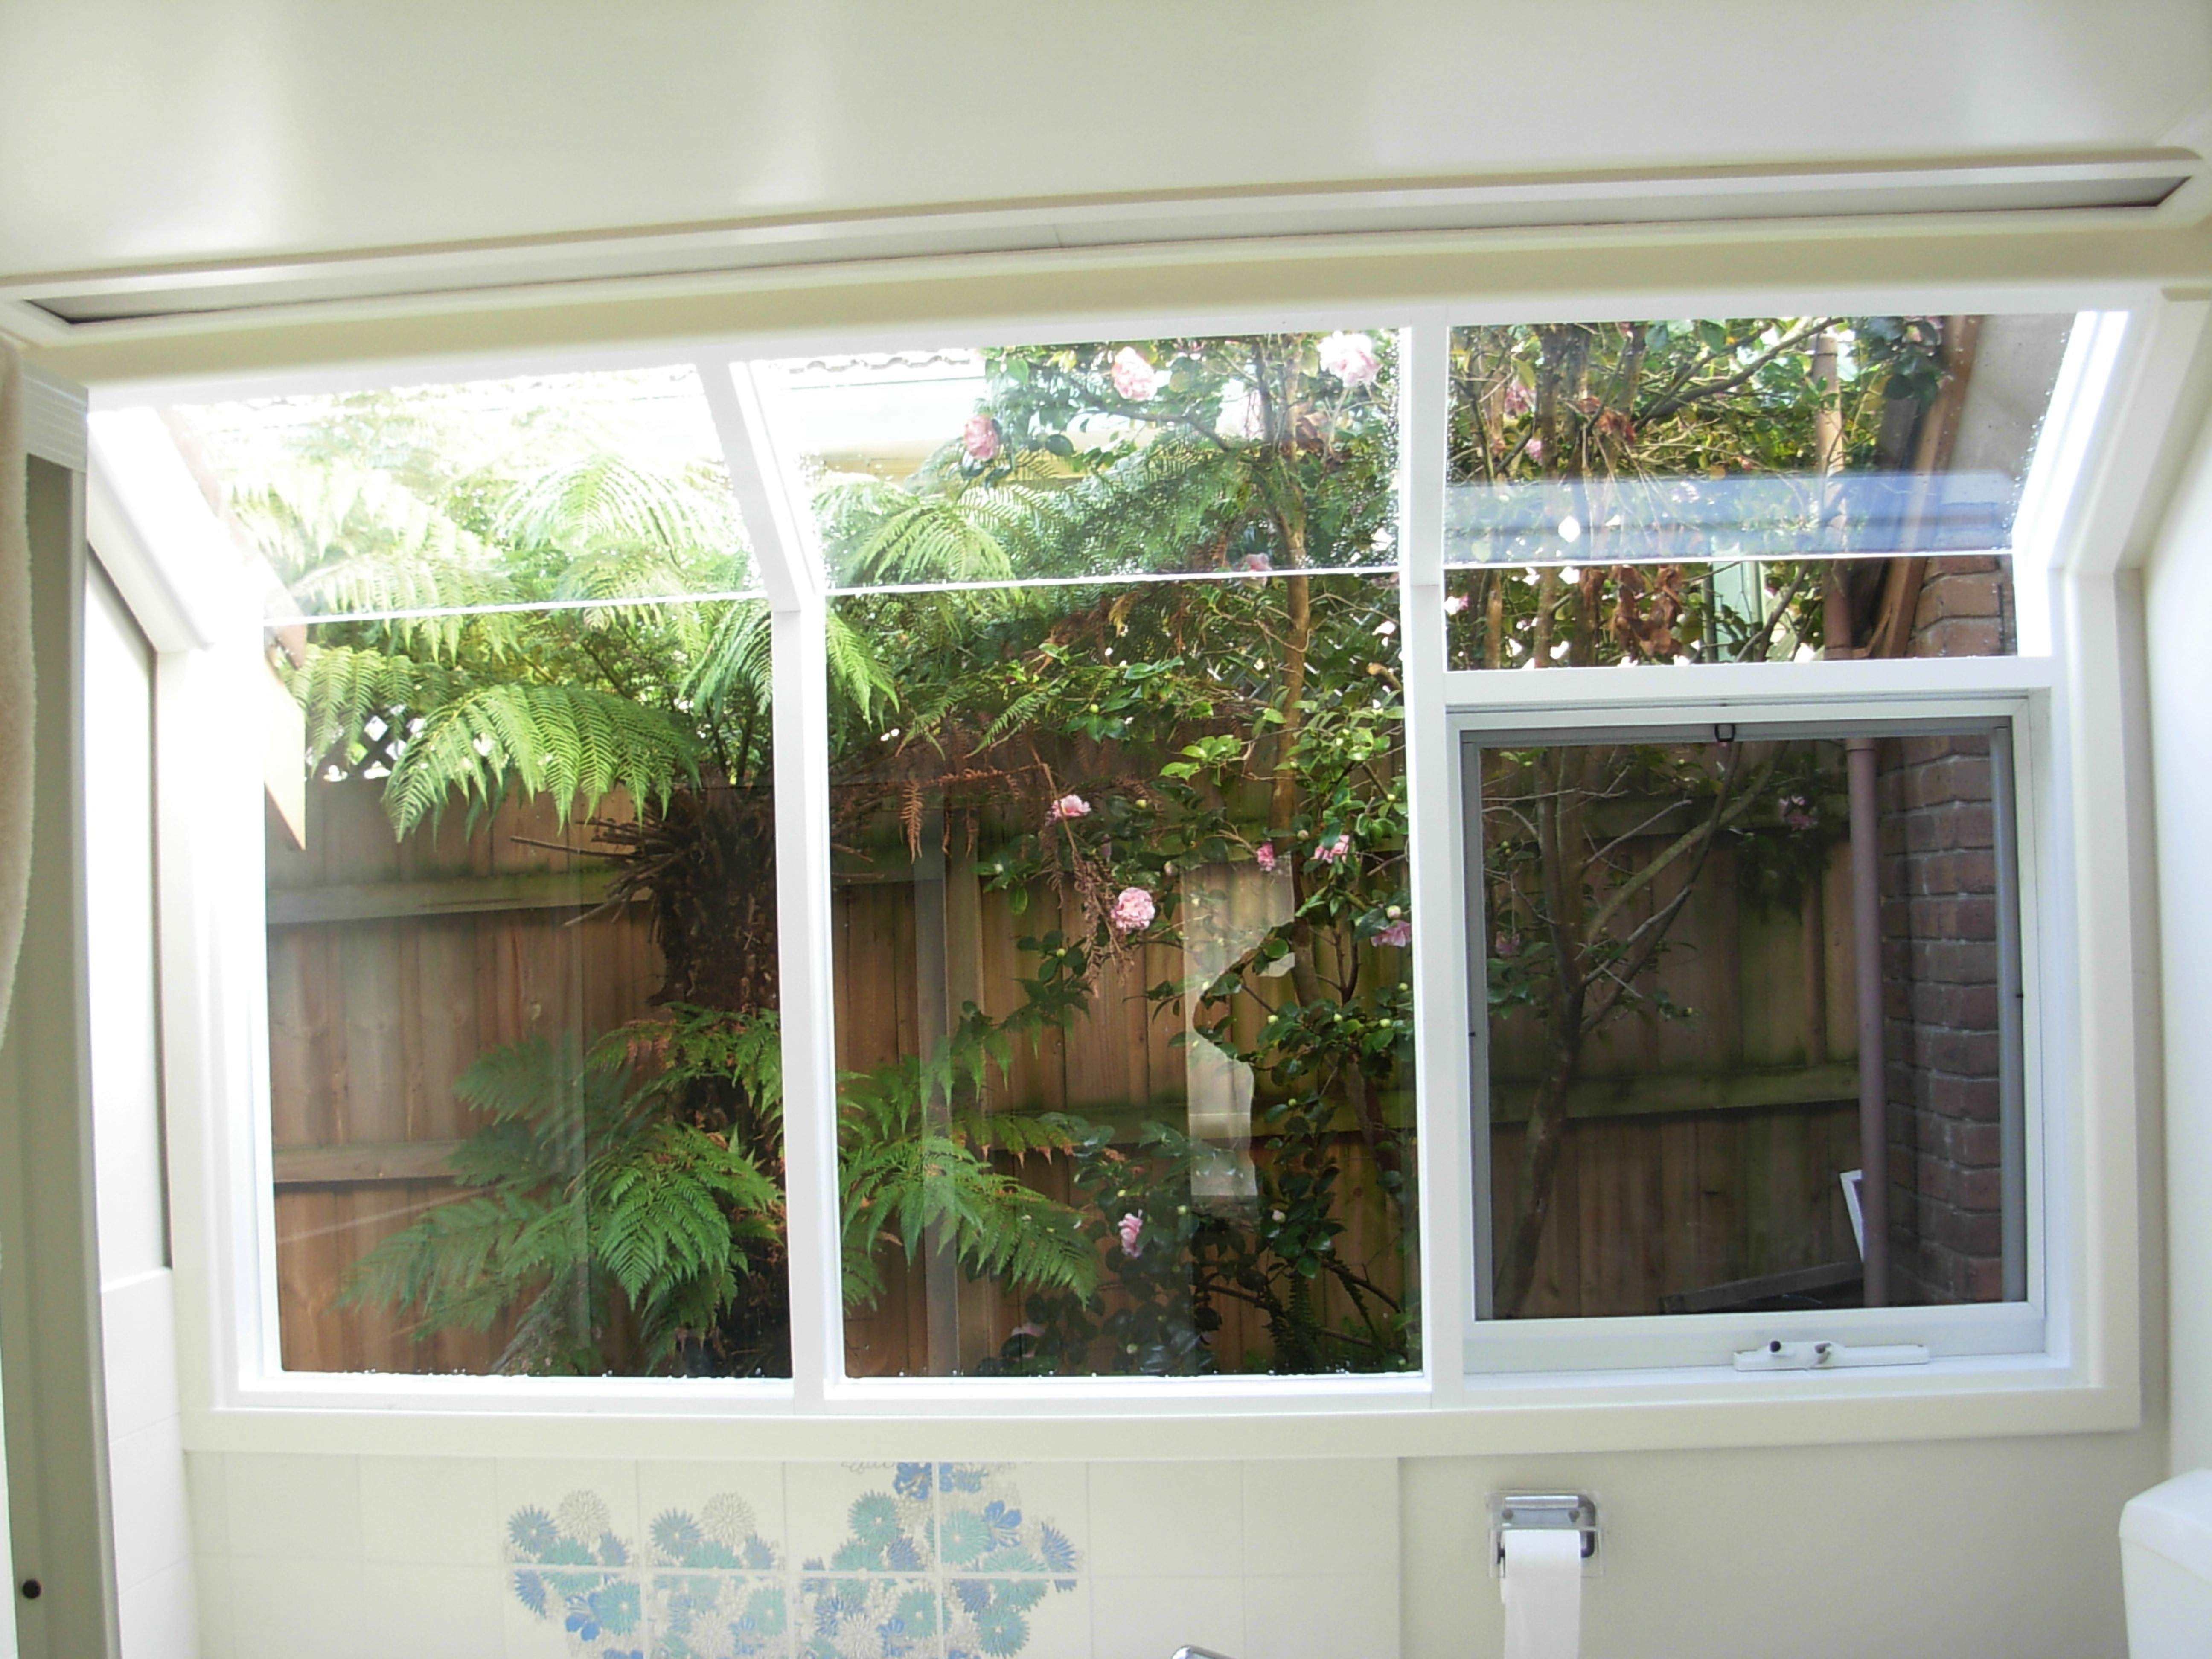 Aluminium Bay Windows Garden Hooded, How Much Does It Cost To Add A Garden Window In France